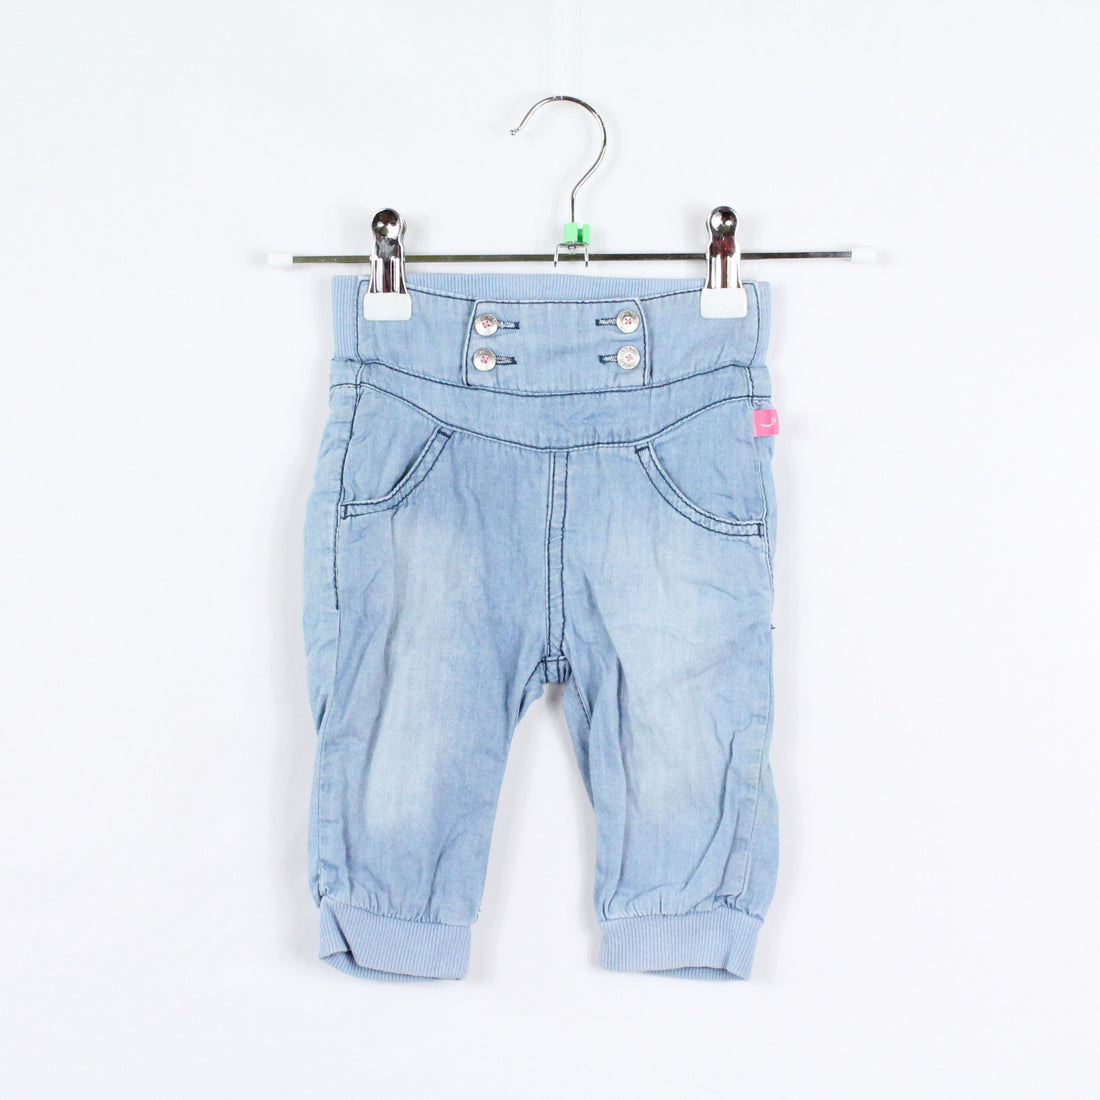 Hose - Baby Face - lang - 68 - hellblau - Jeans - Girl - sehr guter Zustand